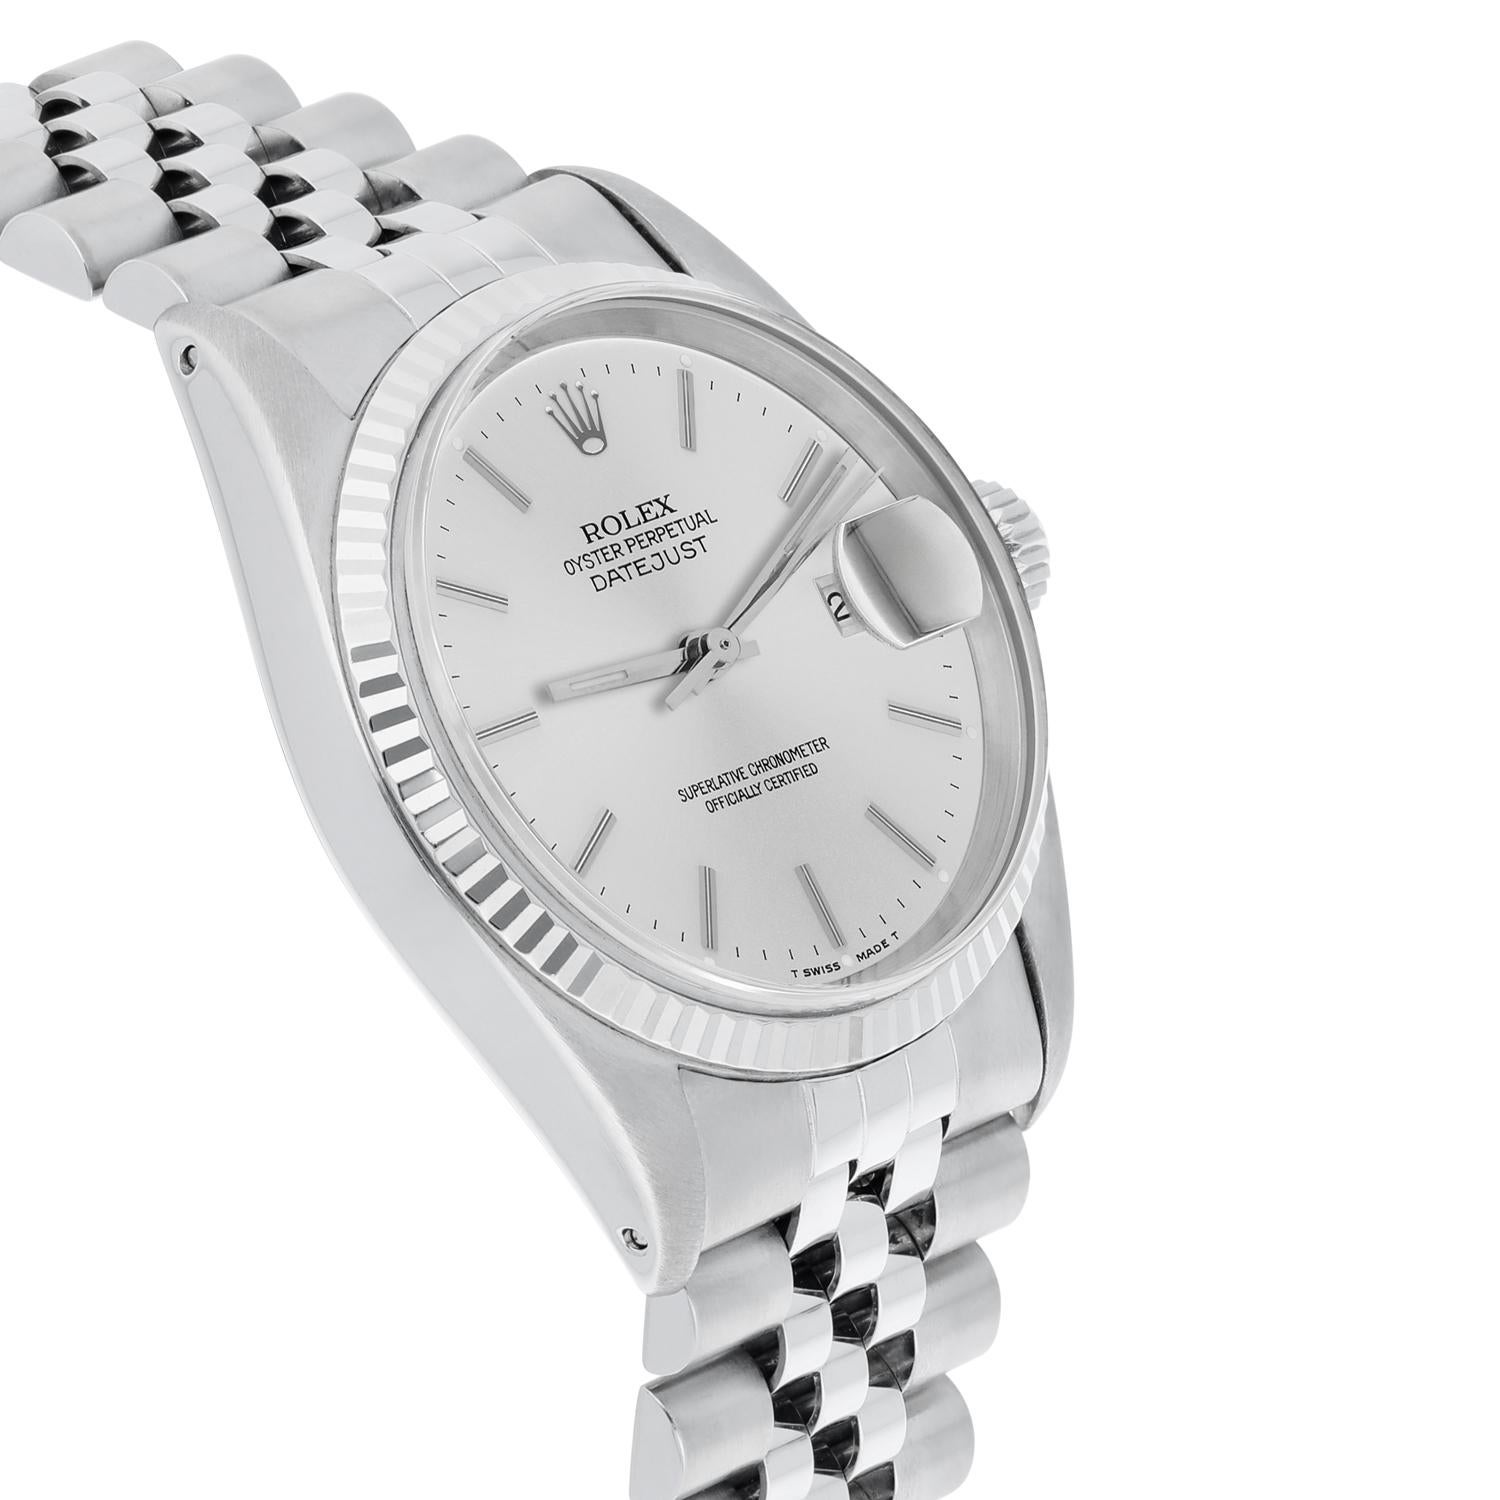 Rolex Datejust 36mm Stainless Steel 16014 Silver Stick Dial, Circa 1987 For Sale 1